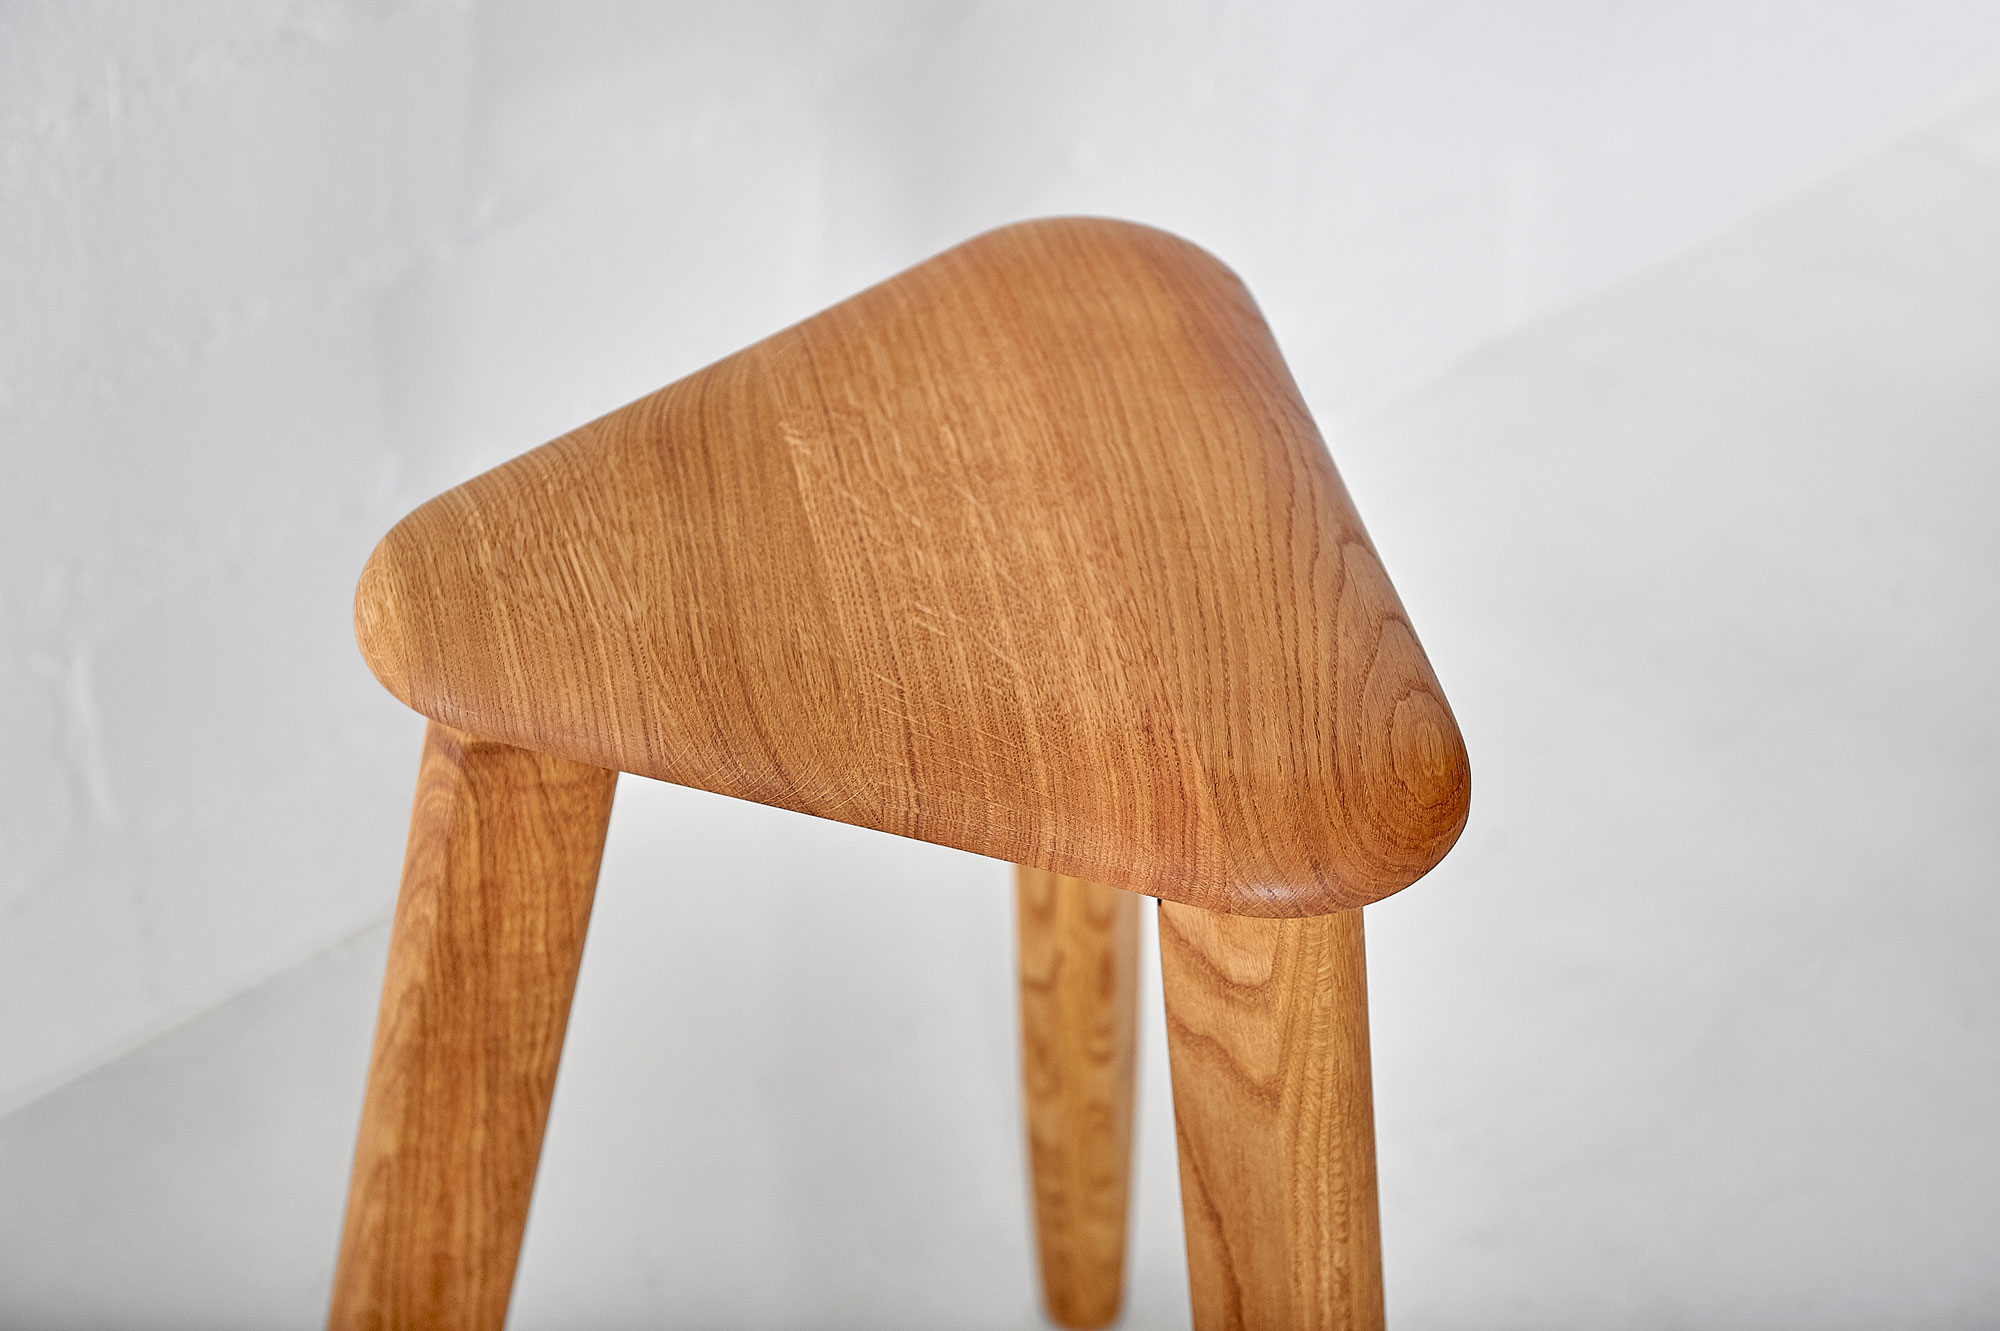 Triangle Wood Stool AETAS SPACE Edited custom made in solid wood by vitamin design